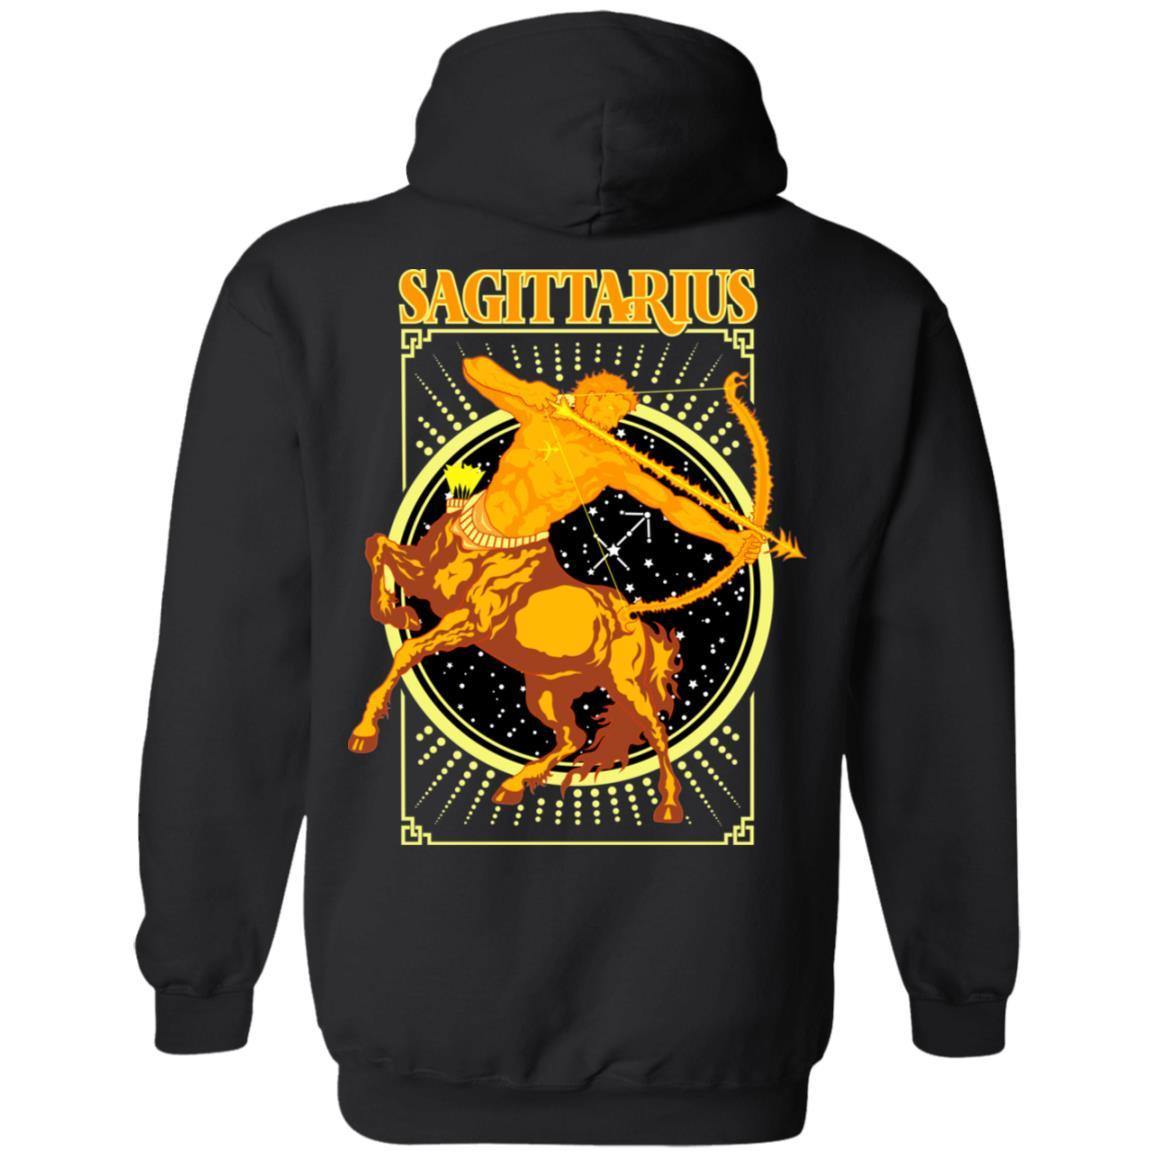 SAGITTARIUS DESIGN ON BACK AND SMALL SCORP ZONE LOGO ON FRONT - Z66 Pullover Hoodie - ScorpZone